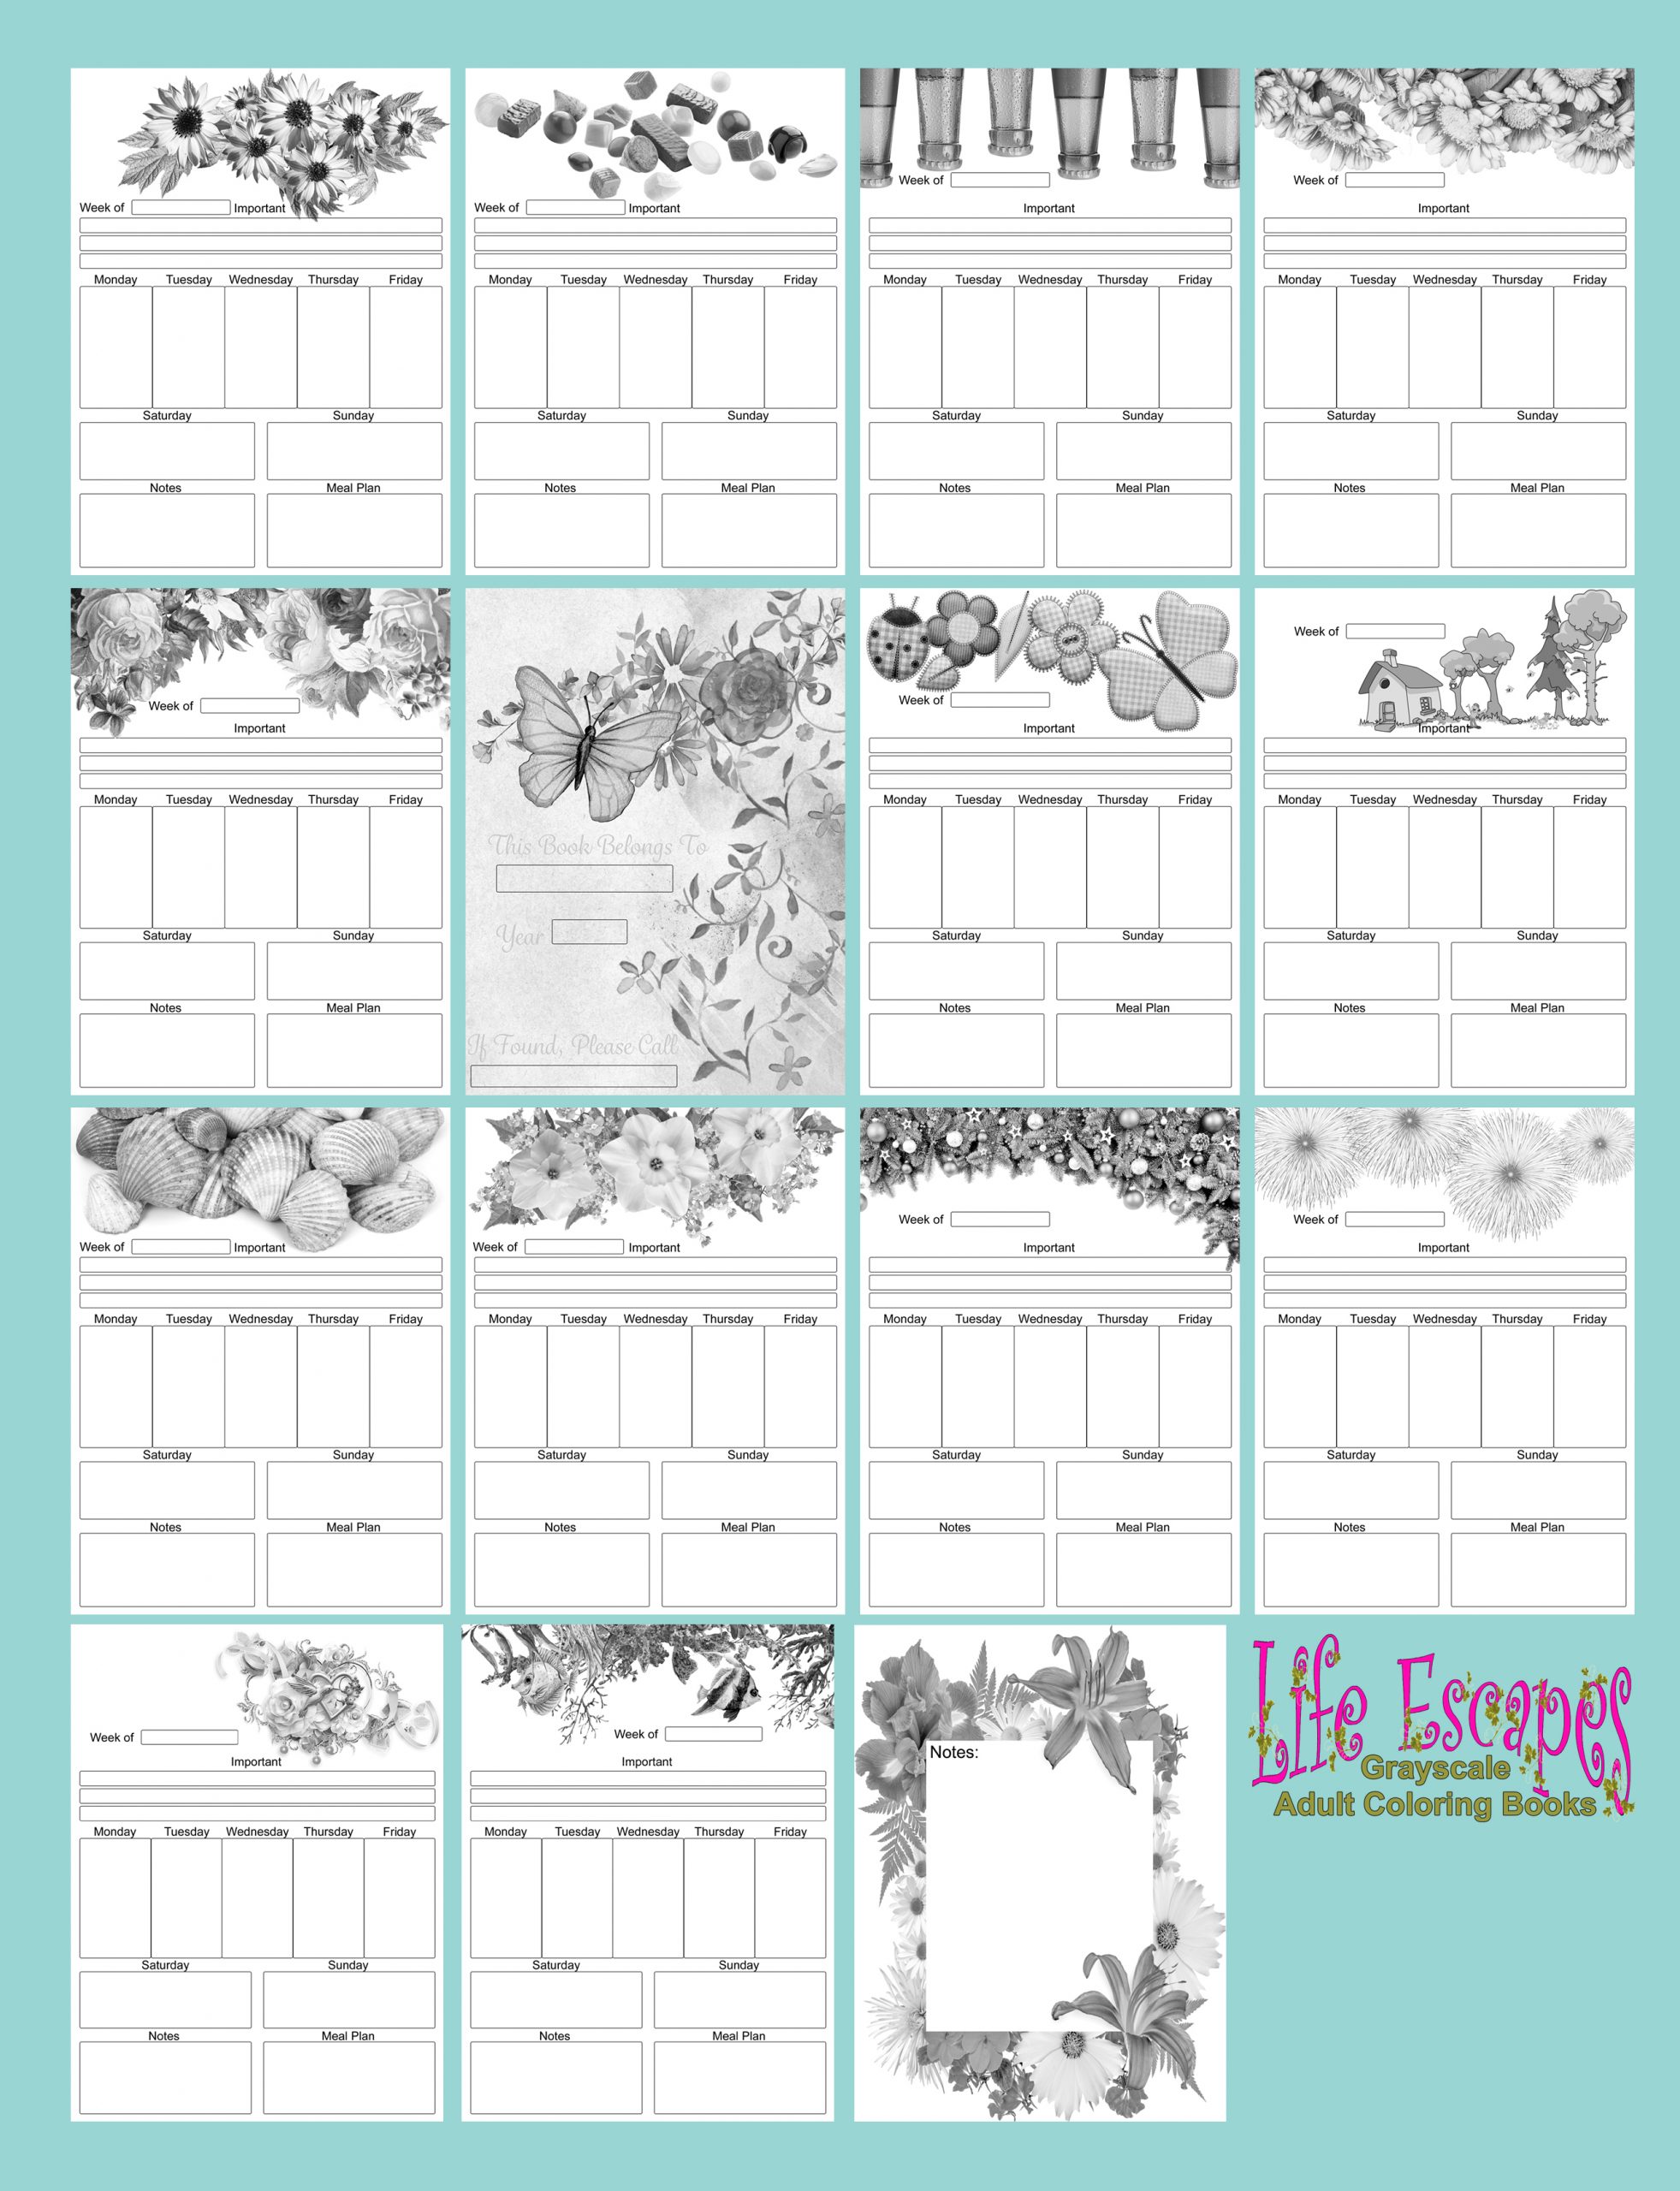 https://coloringbooksforadults.shop/wp-content/uploads/Weekly-Planner-back-cover-scaled.jpg